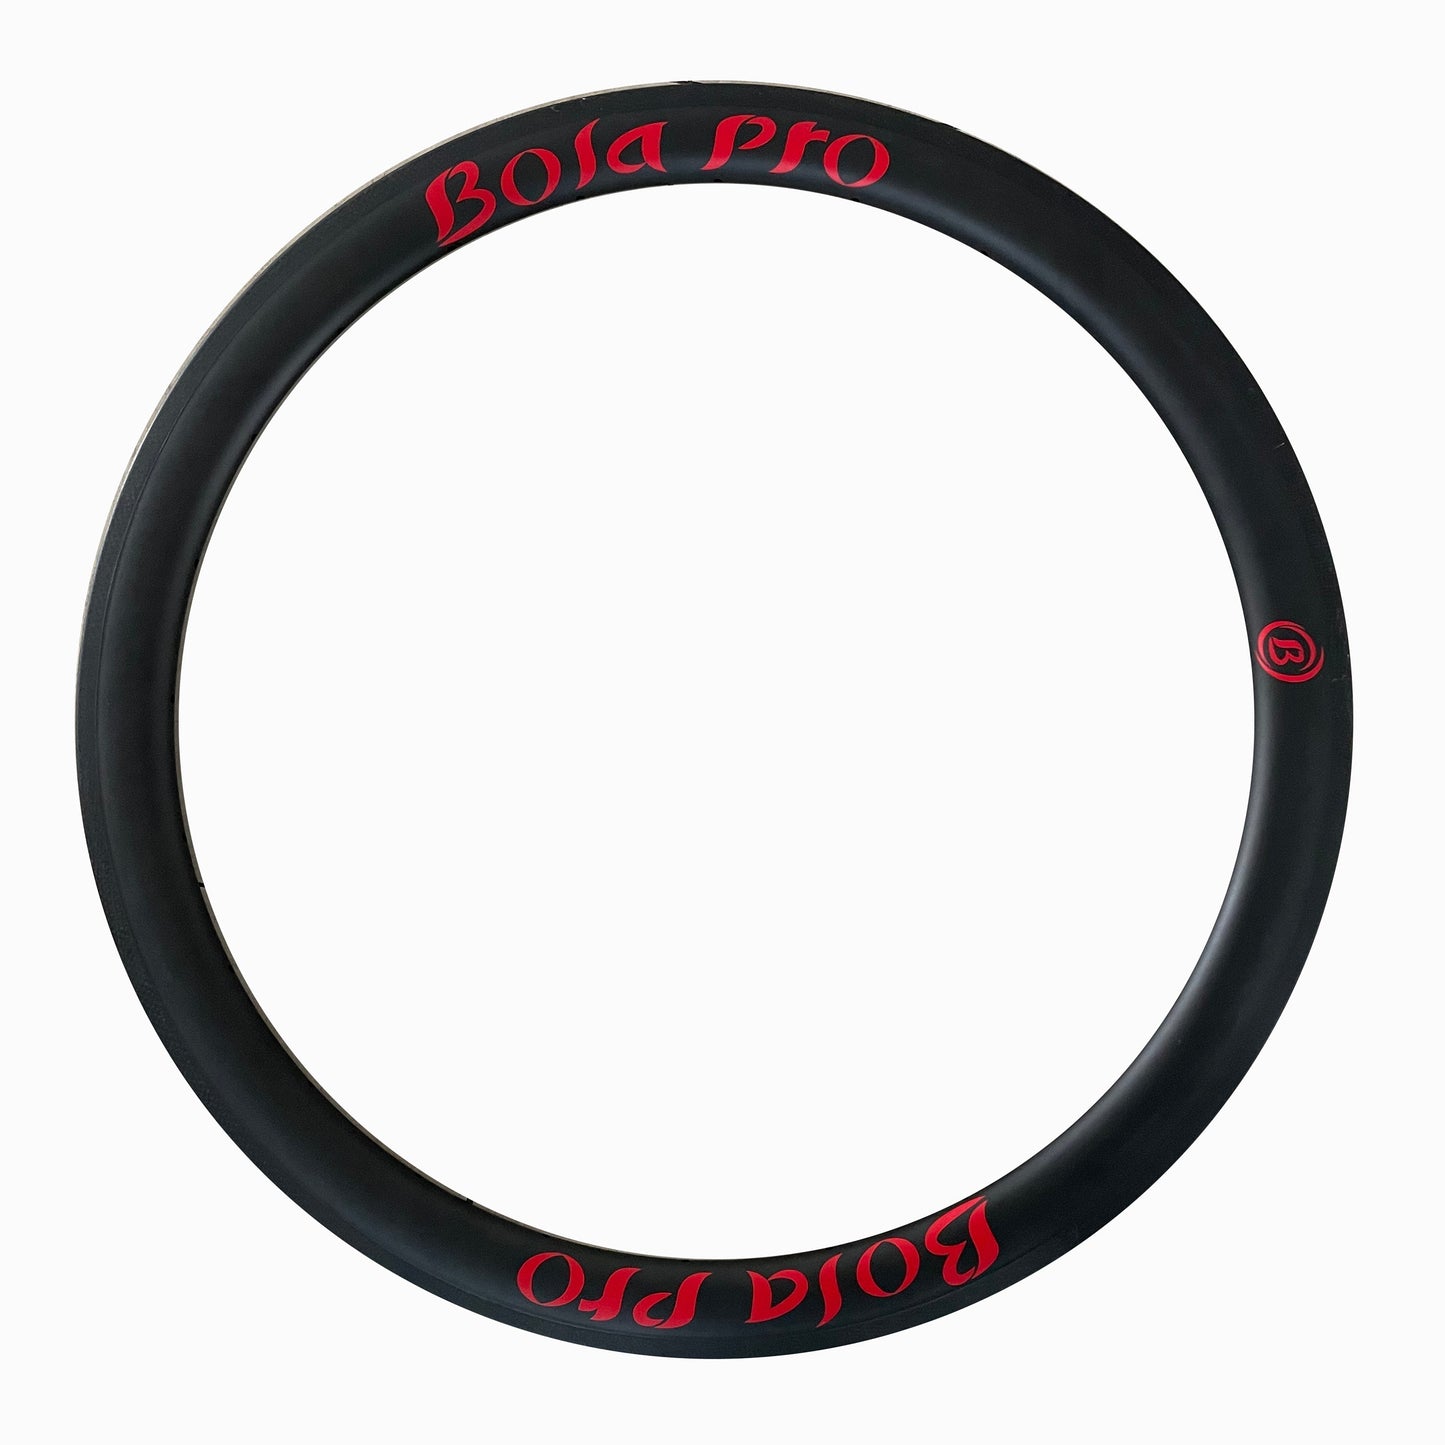 27.5 inch MTB carbon asymmetric bicycle rim 30mm high profile 27mm inner wide for cross-country or all mountain